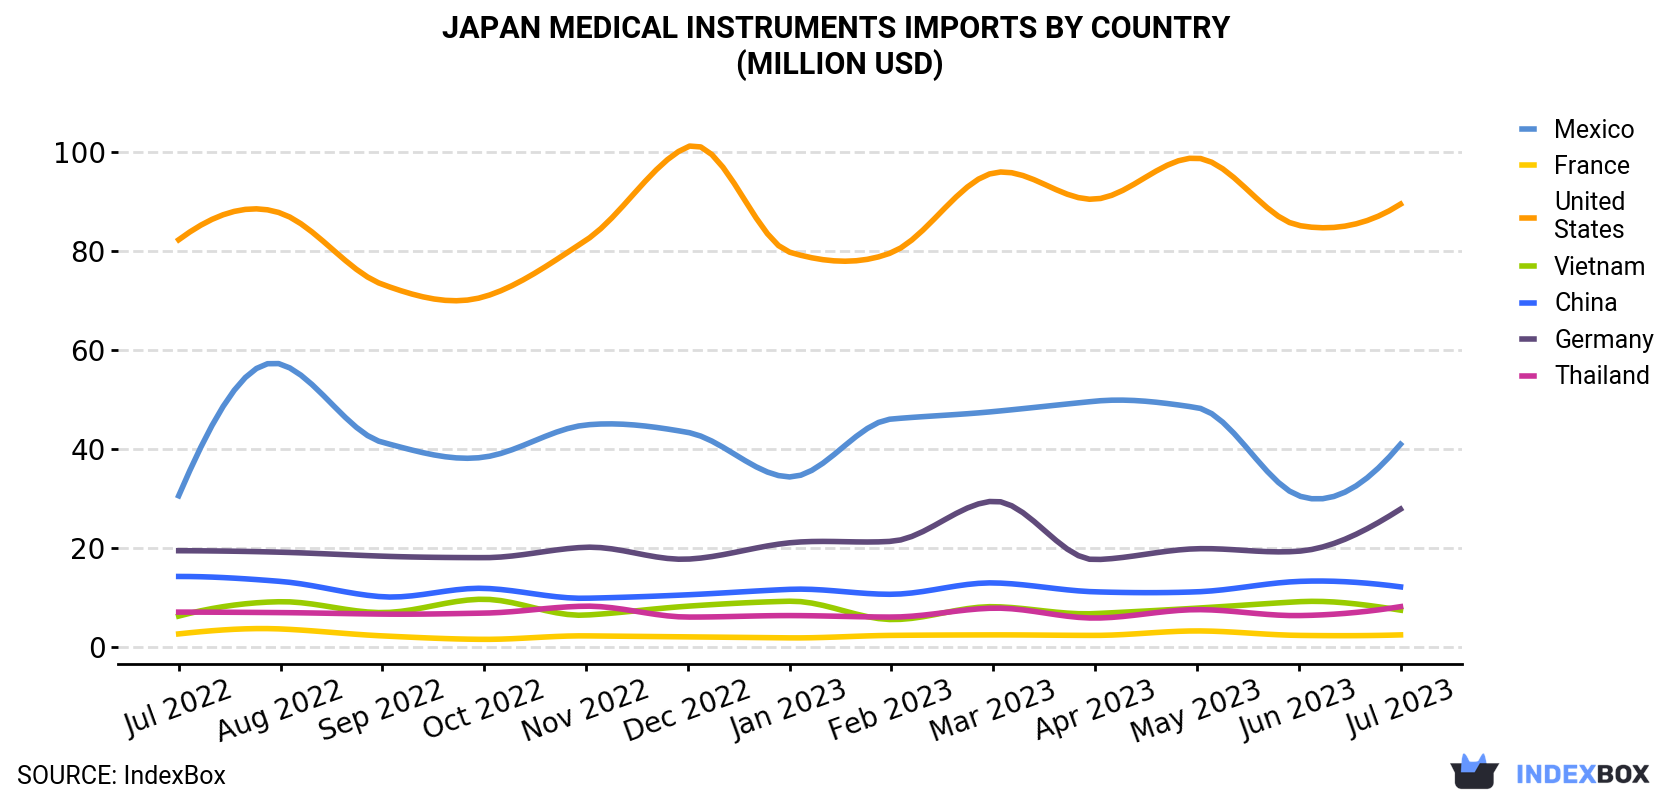 Japan Medical Instruments Imports By Country (Million USD)